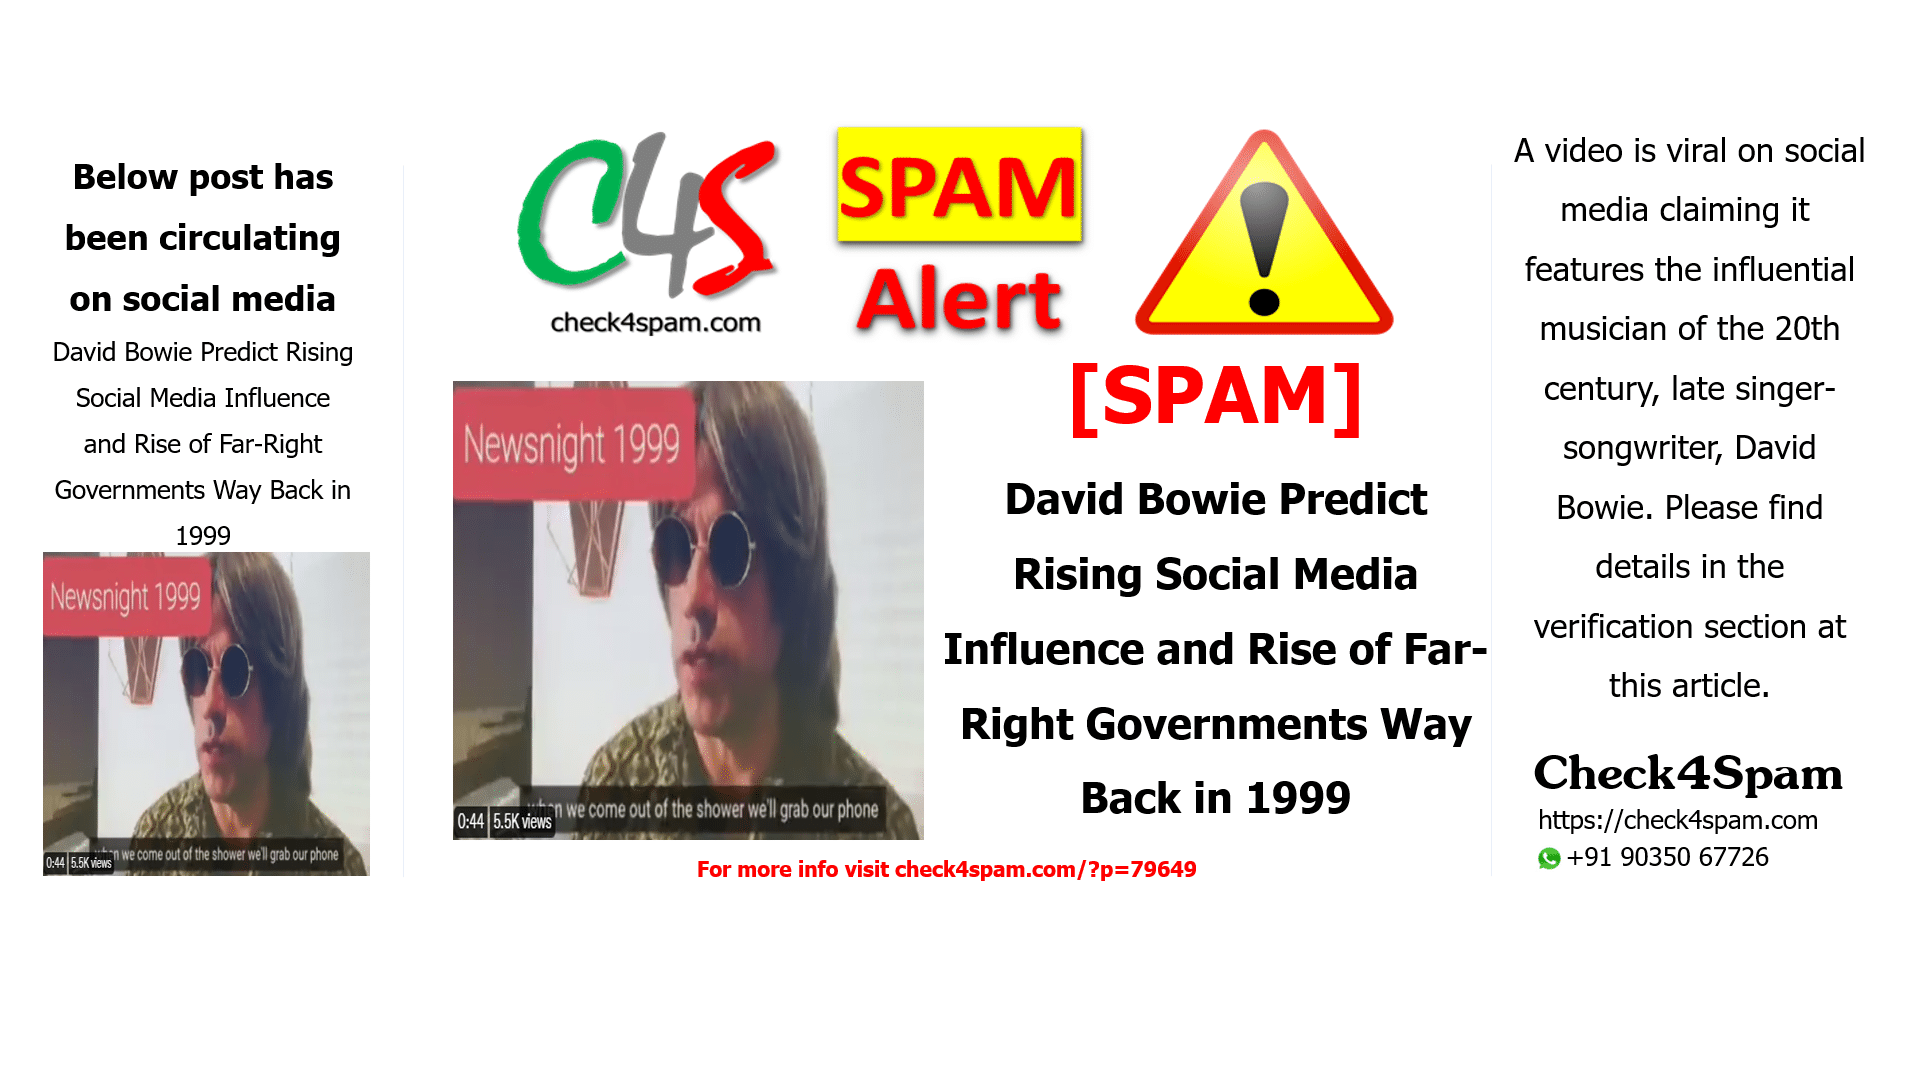 David Bowie Predict Rising Social Media Influence and Rise of Far-Right Governments Way Back in 1999